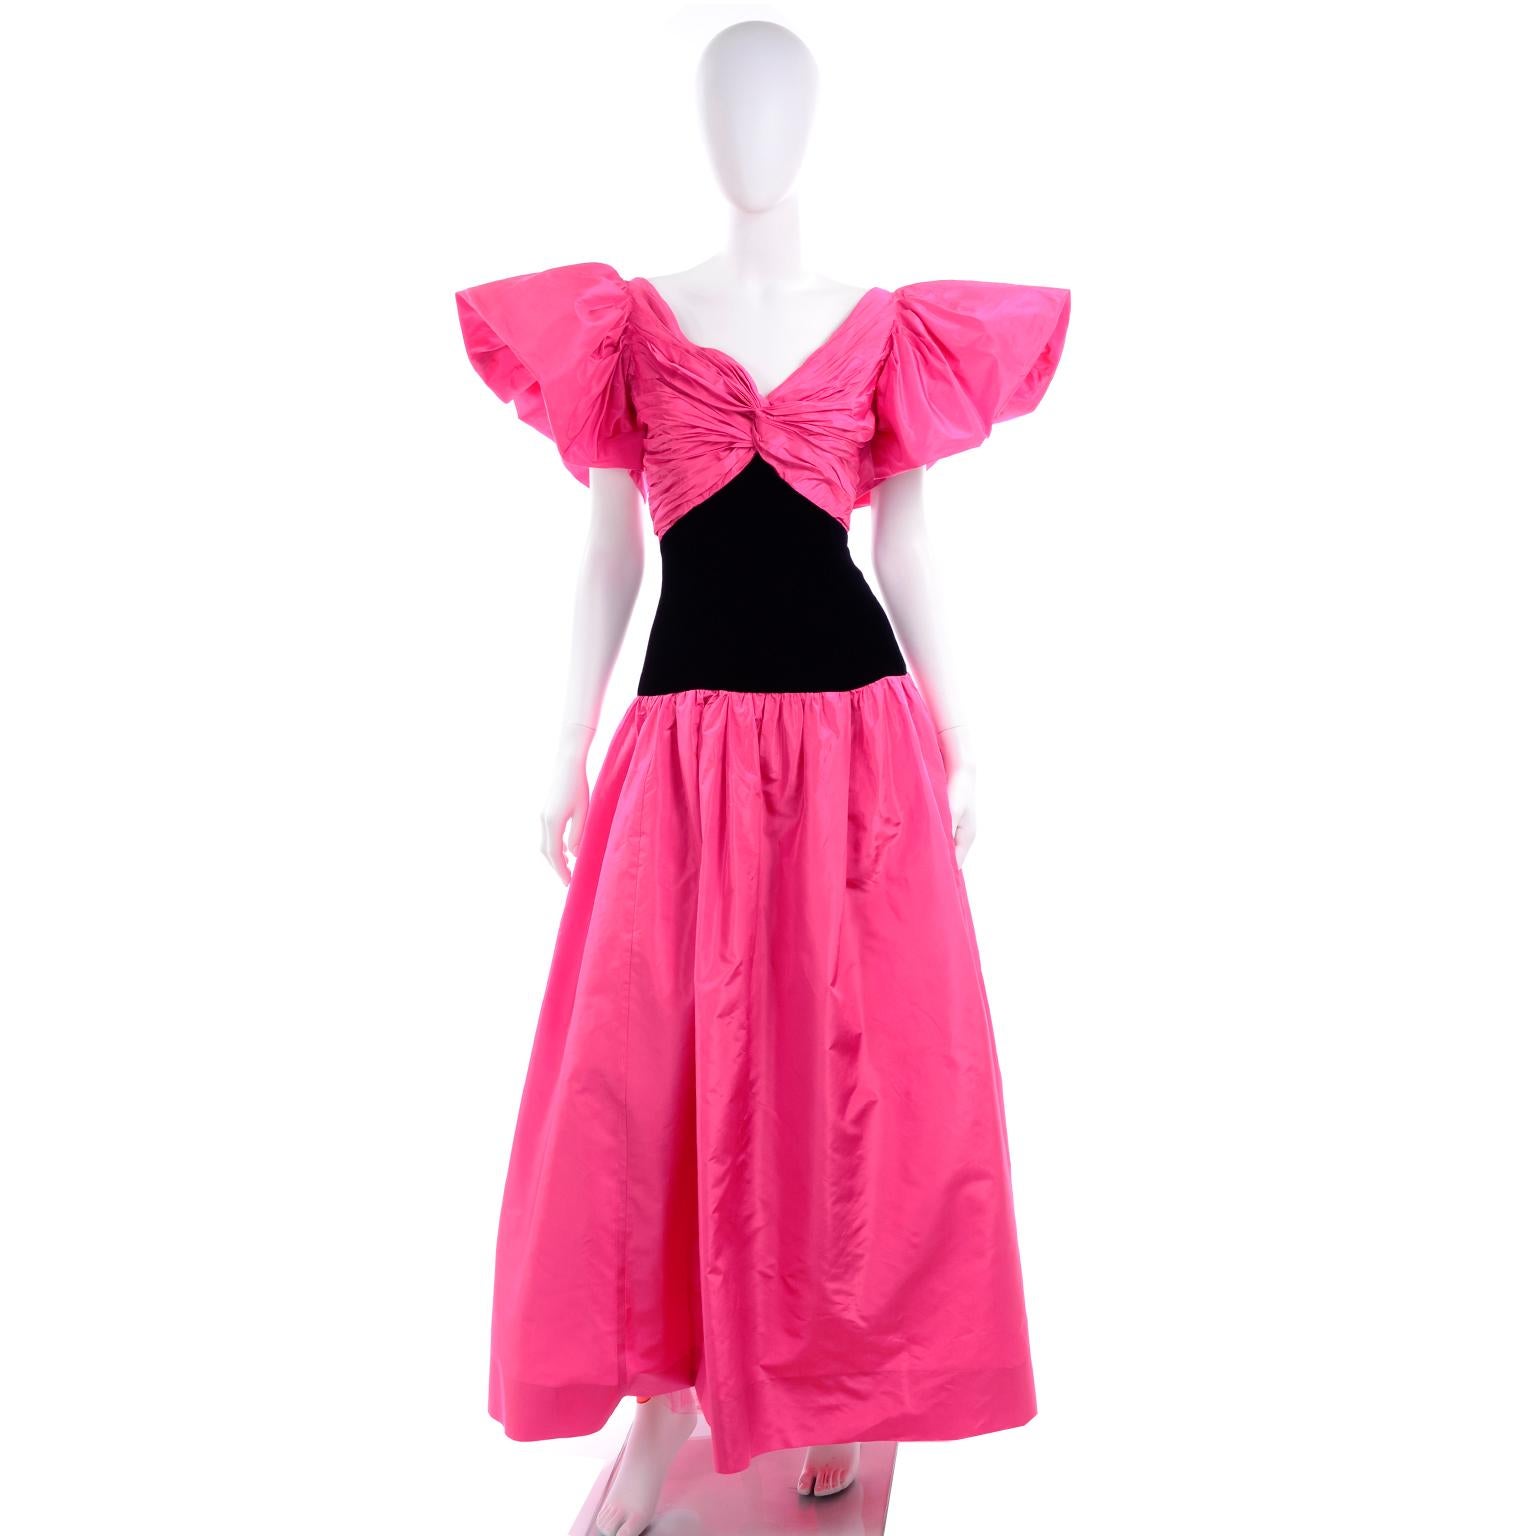 This is a gorgeous fuchsia pink taffeta long dress with black velvet at the waist Designed by Lorcan Mullany for Bellville Sassoon in the 1980's.  This lovely evening gown has dramatic slightly off shoulder butterfly sleeves and ruching at the bust.